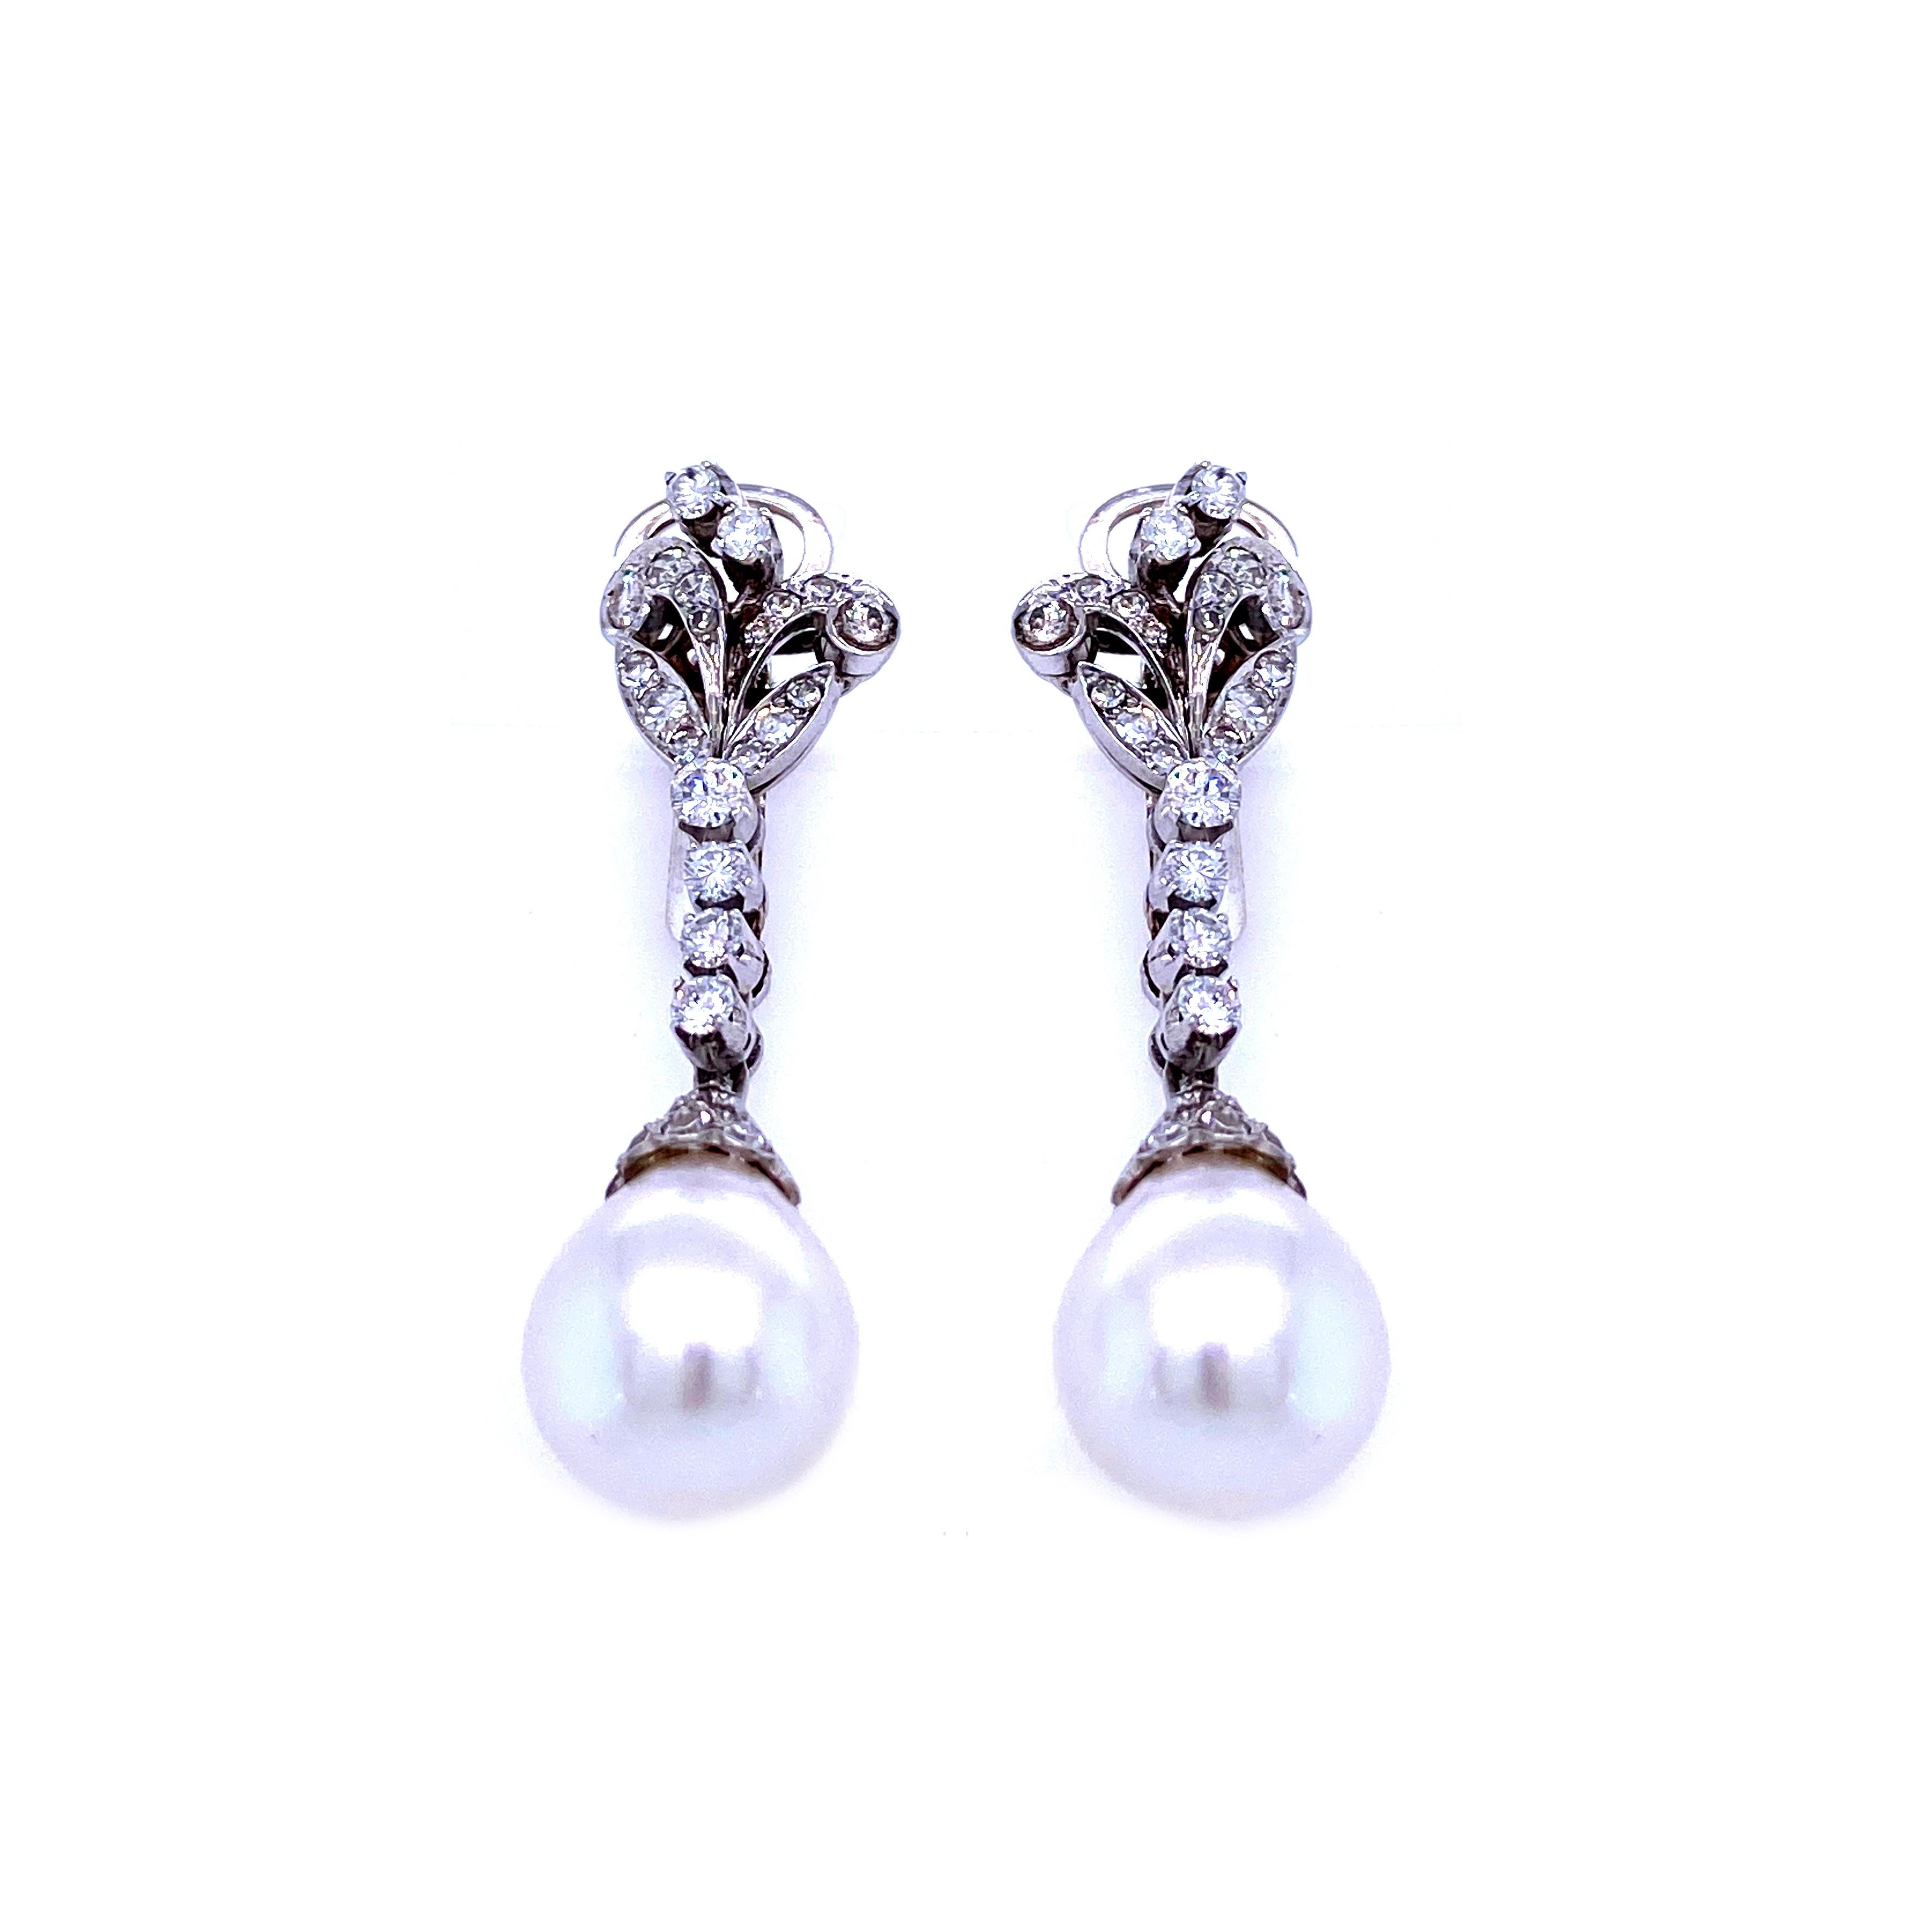 These beautiful handcrafted Original Art Nouveau diamond 18k white gold earrings feature two large Australian pearls of perfect shape, condition and color, approx. 11 mm. They are set with sparkling round brilliant cut diamonds weighing